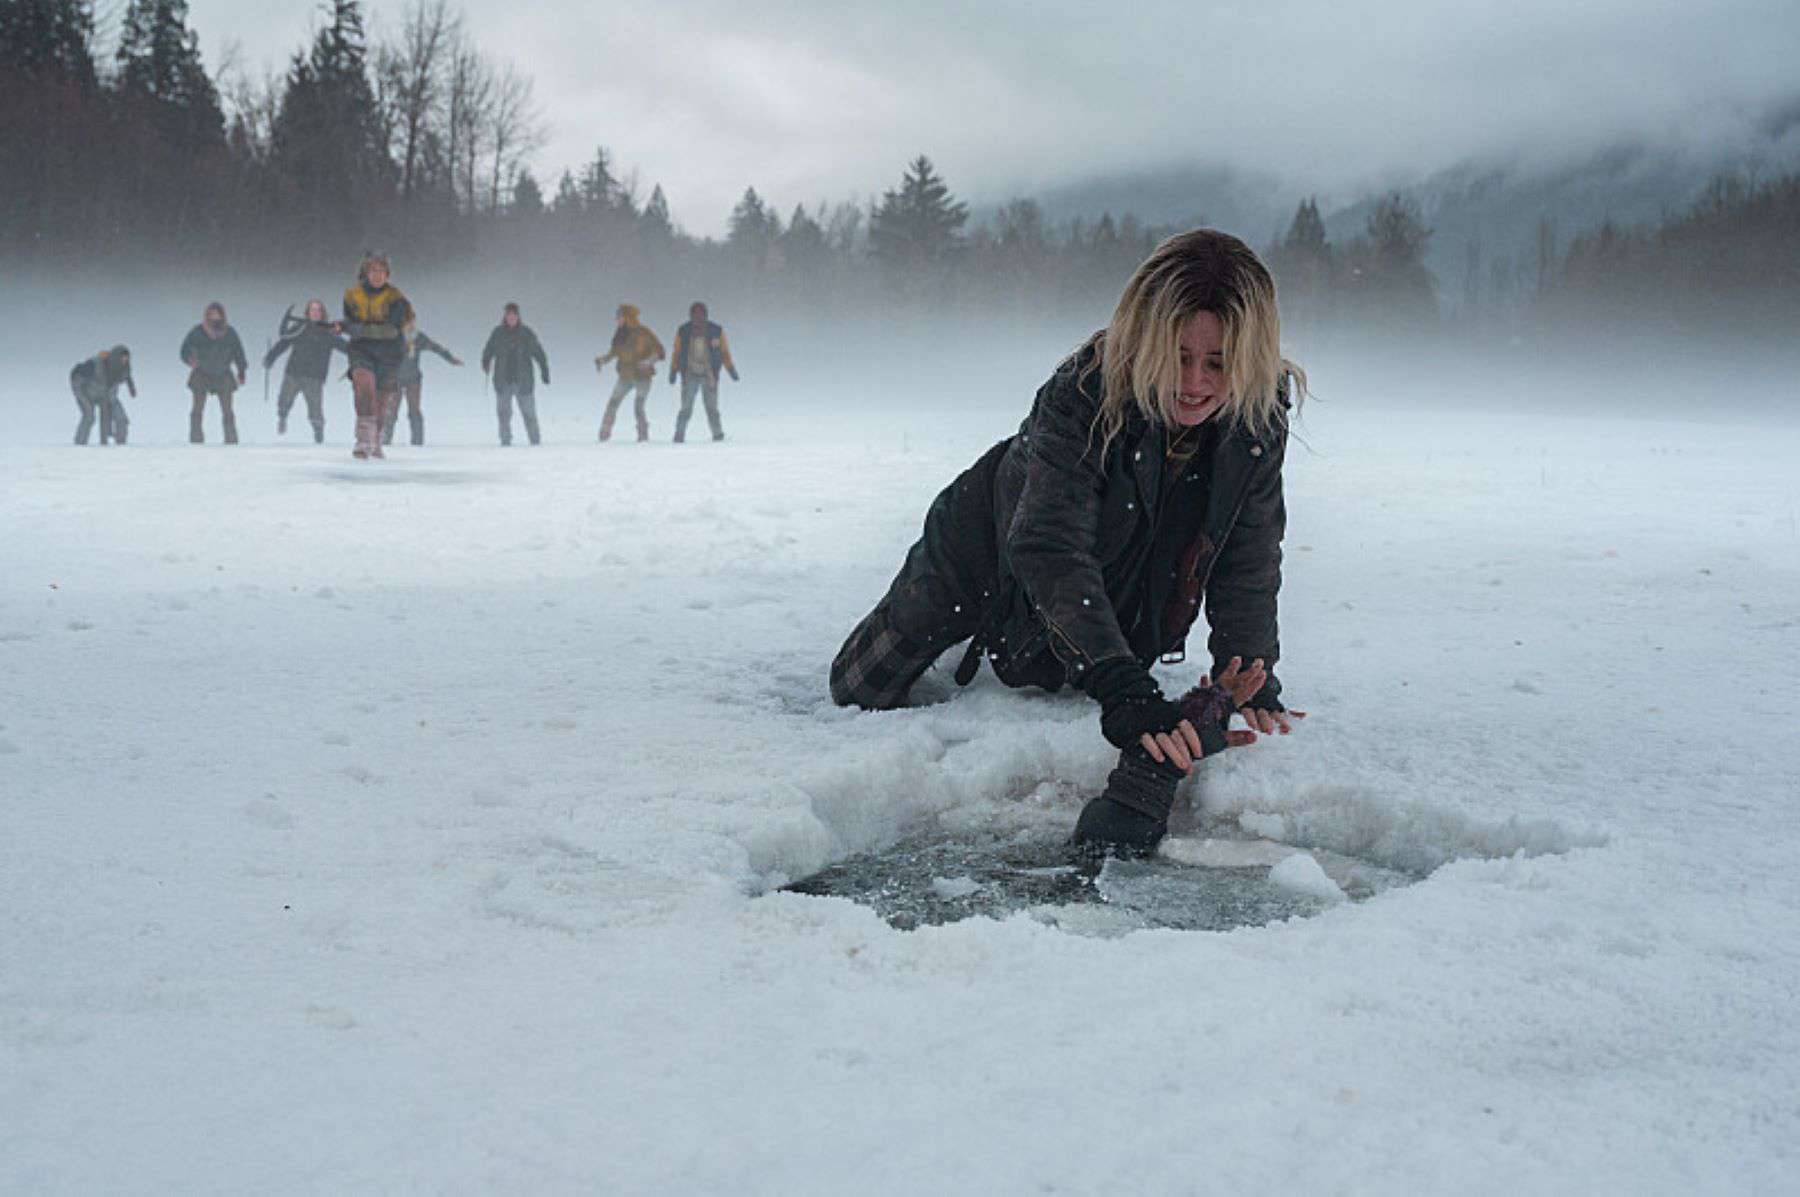 A girl attempts to pull someone out of the water in a frozen lake in this photo by Showtime.